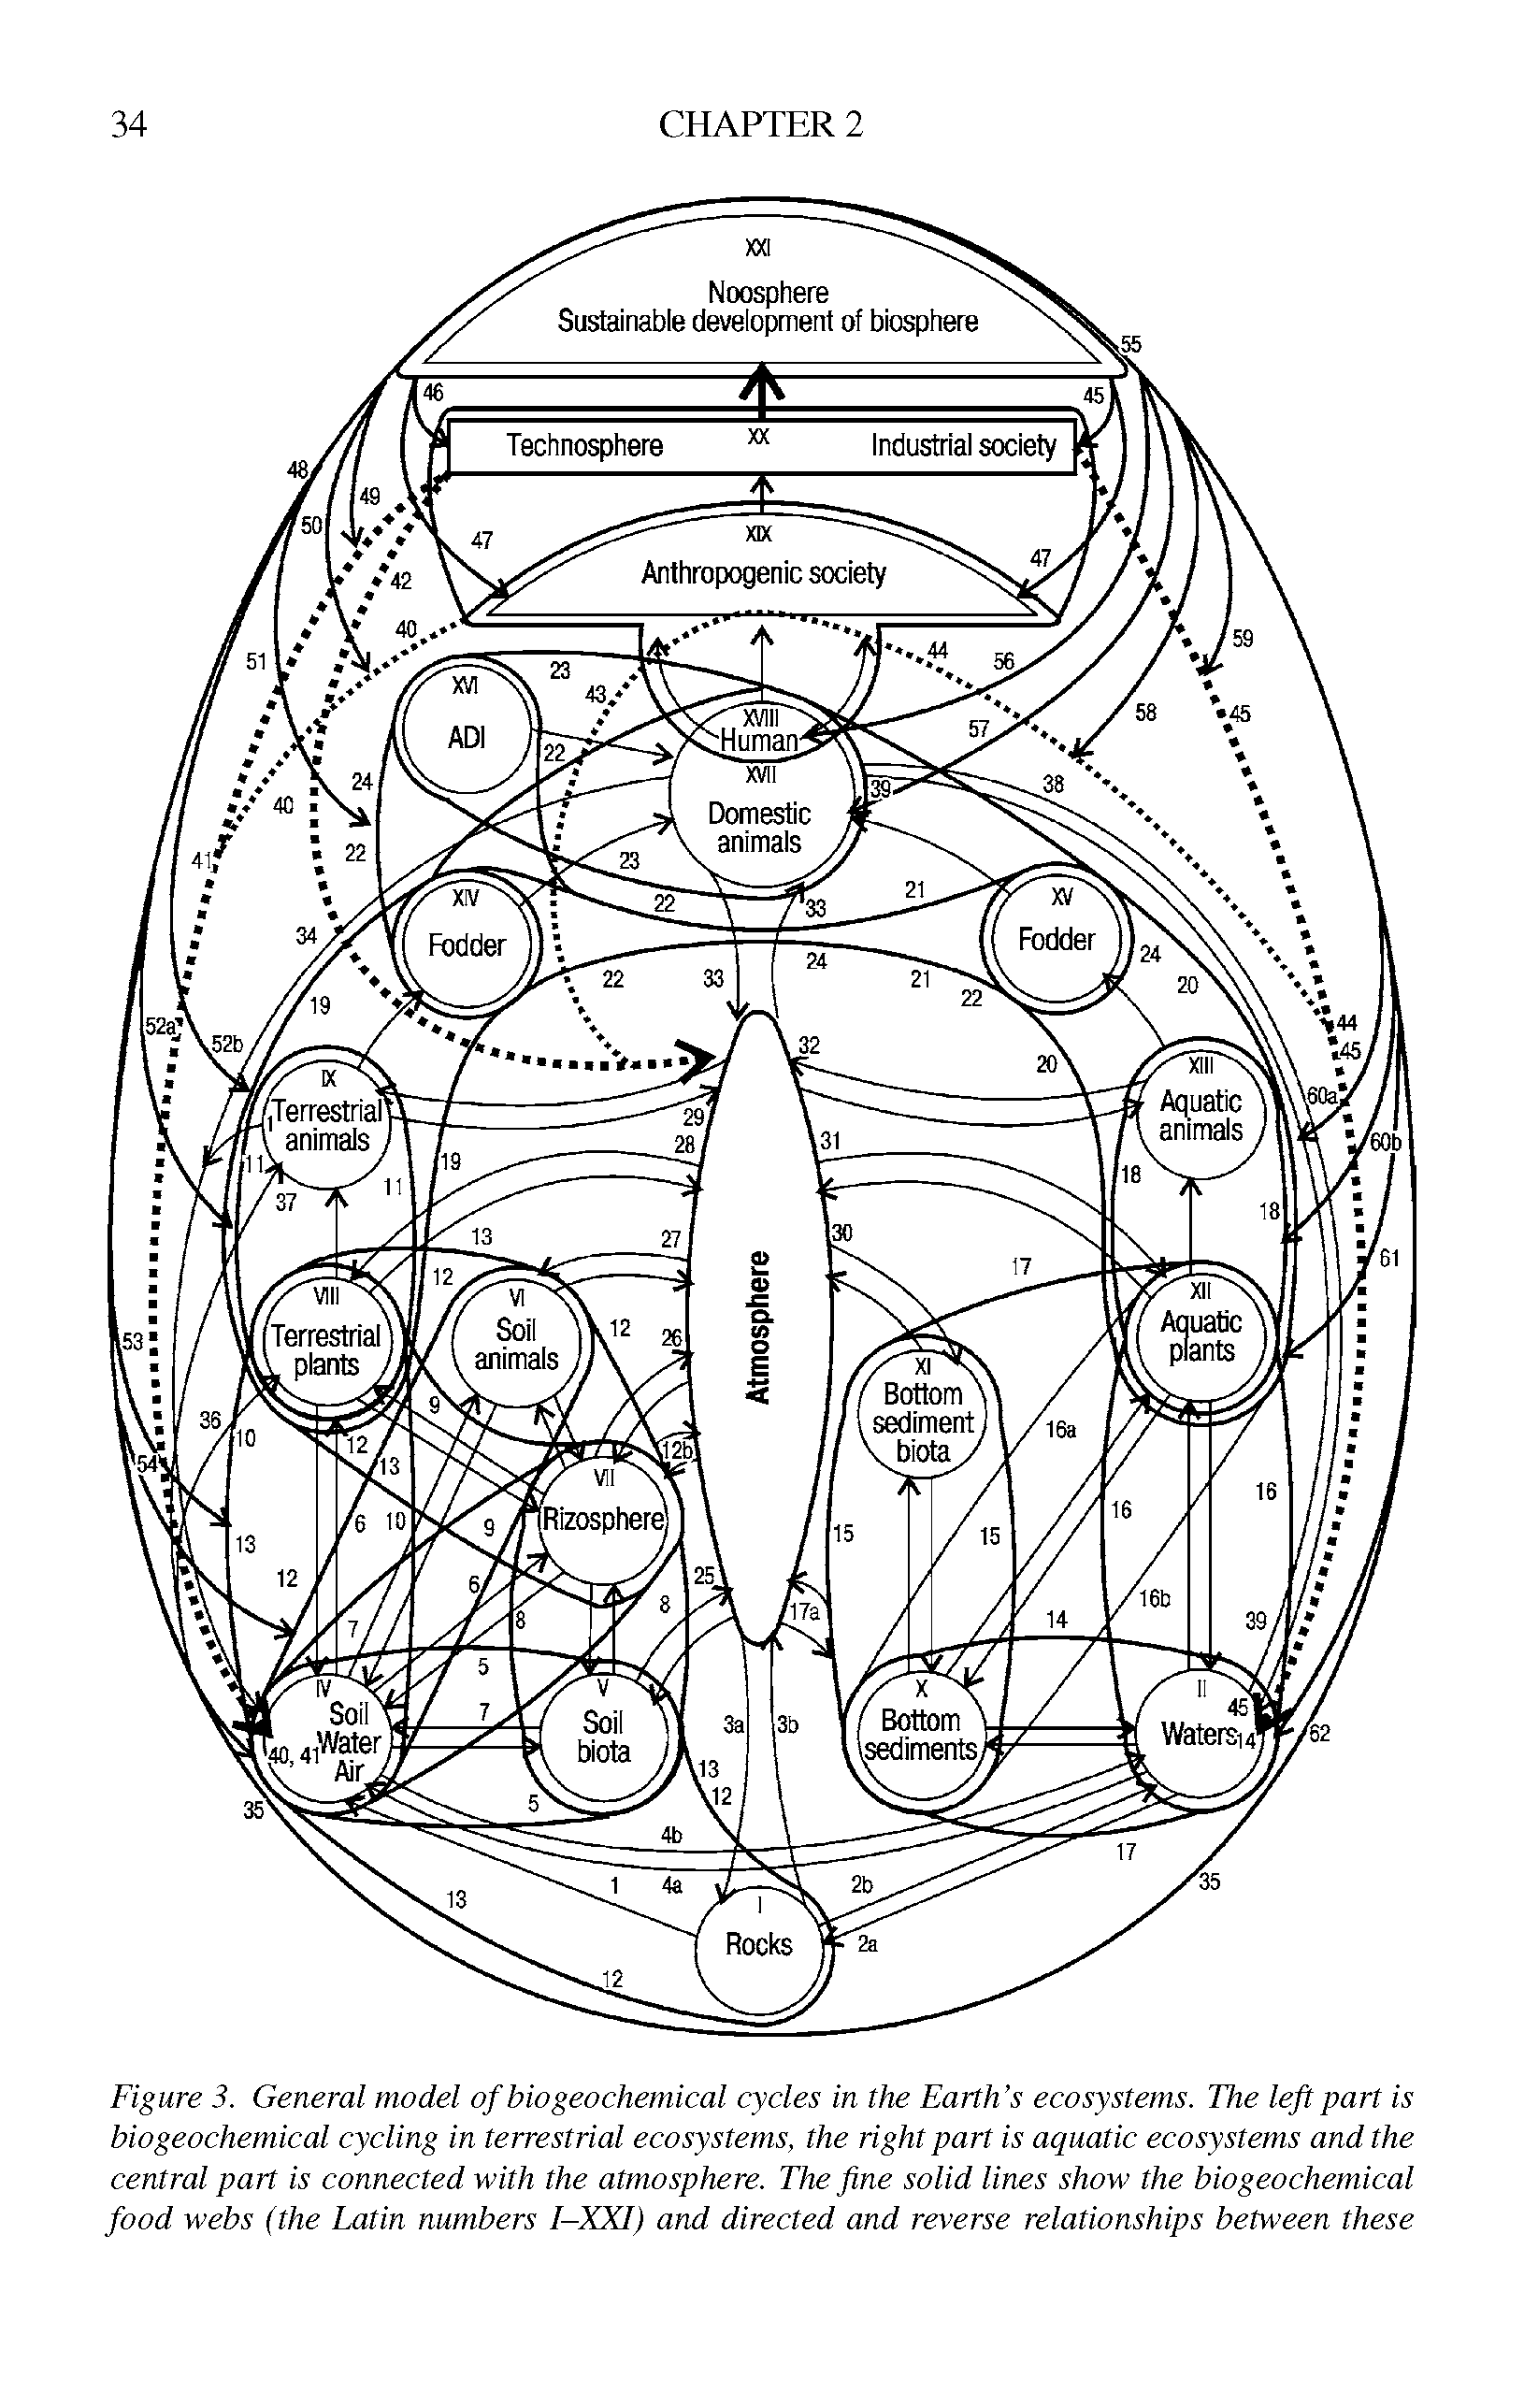 Figure 3. General model of bio geo chemical cycles in the Earth s ecosystems. The left part is bio geochemical cycling in terrestrial ecosystems, the right part is aquatic ecosystems and the central part is connected with the atmosphere. The fine solid lines show the biogeochemical food webs (the Latin numbers I-XXI) and directed and reverse relationships between these...